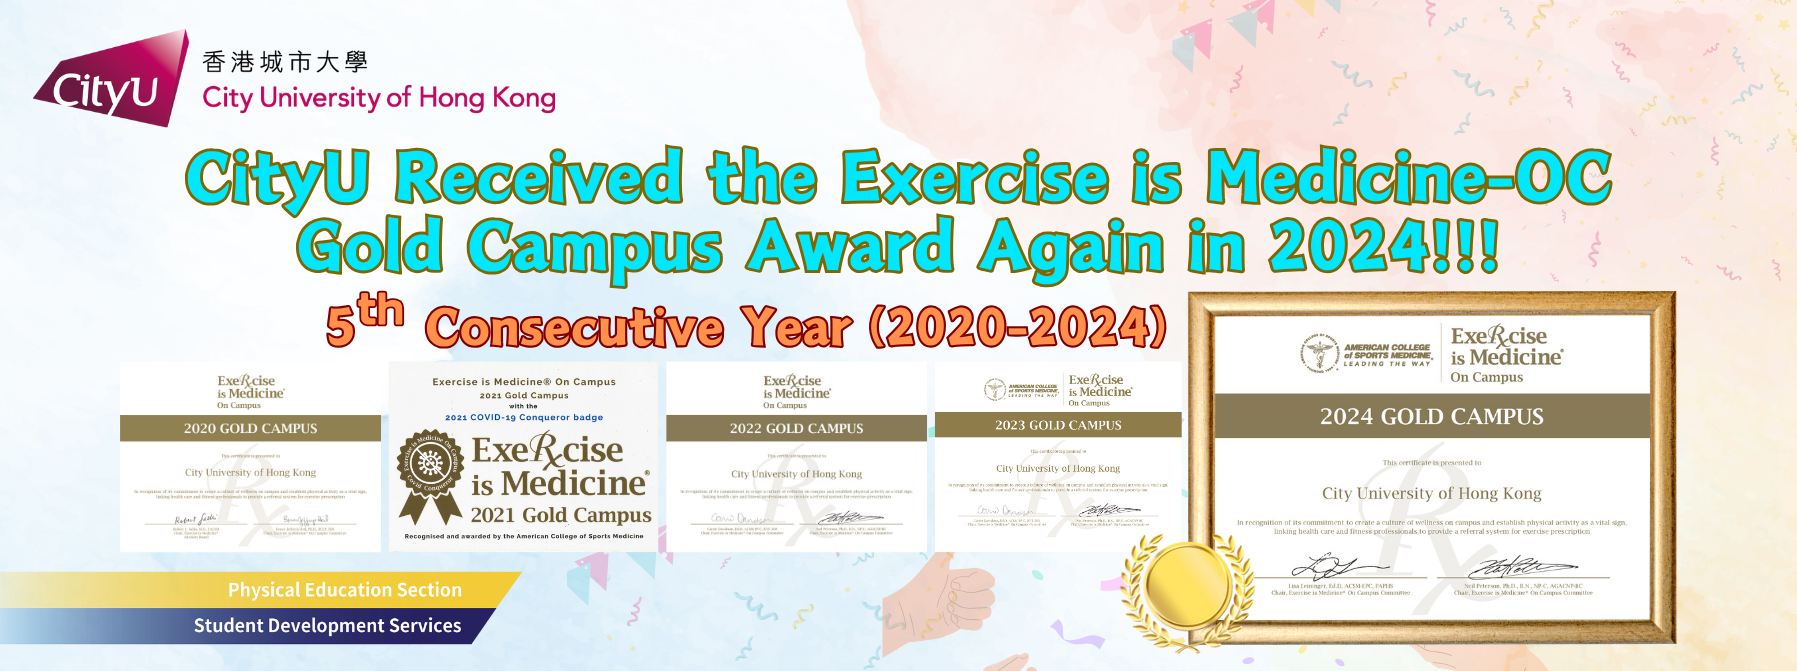 Exercise is Medicine on Campus - 2024 Gold Campus